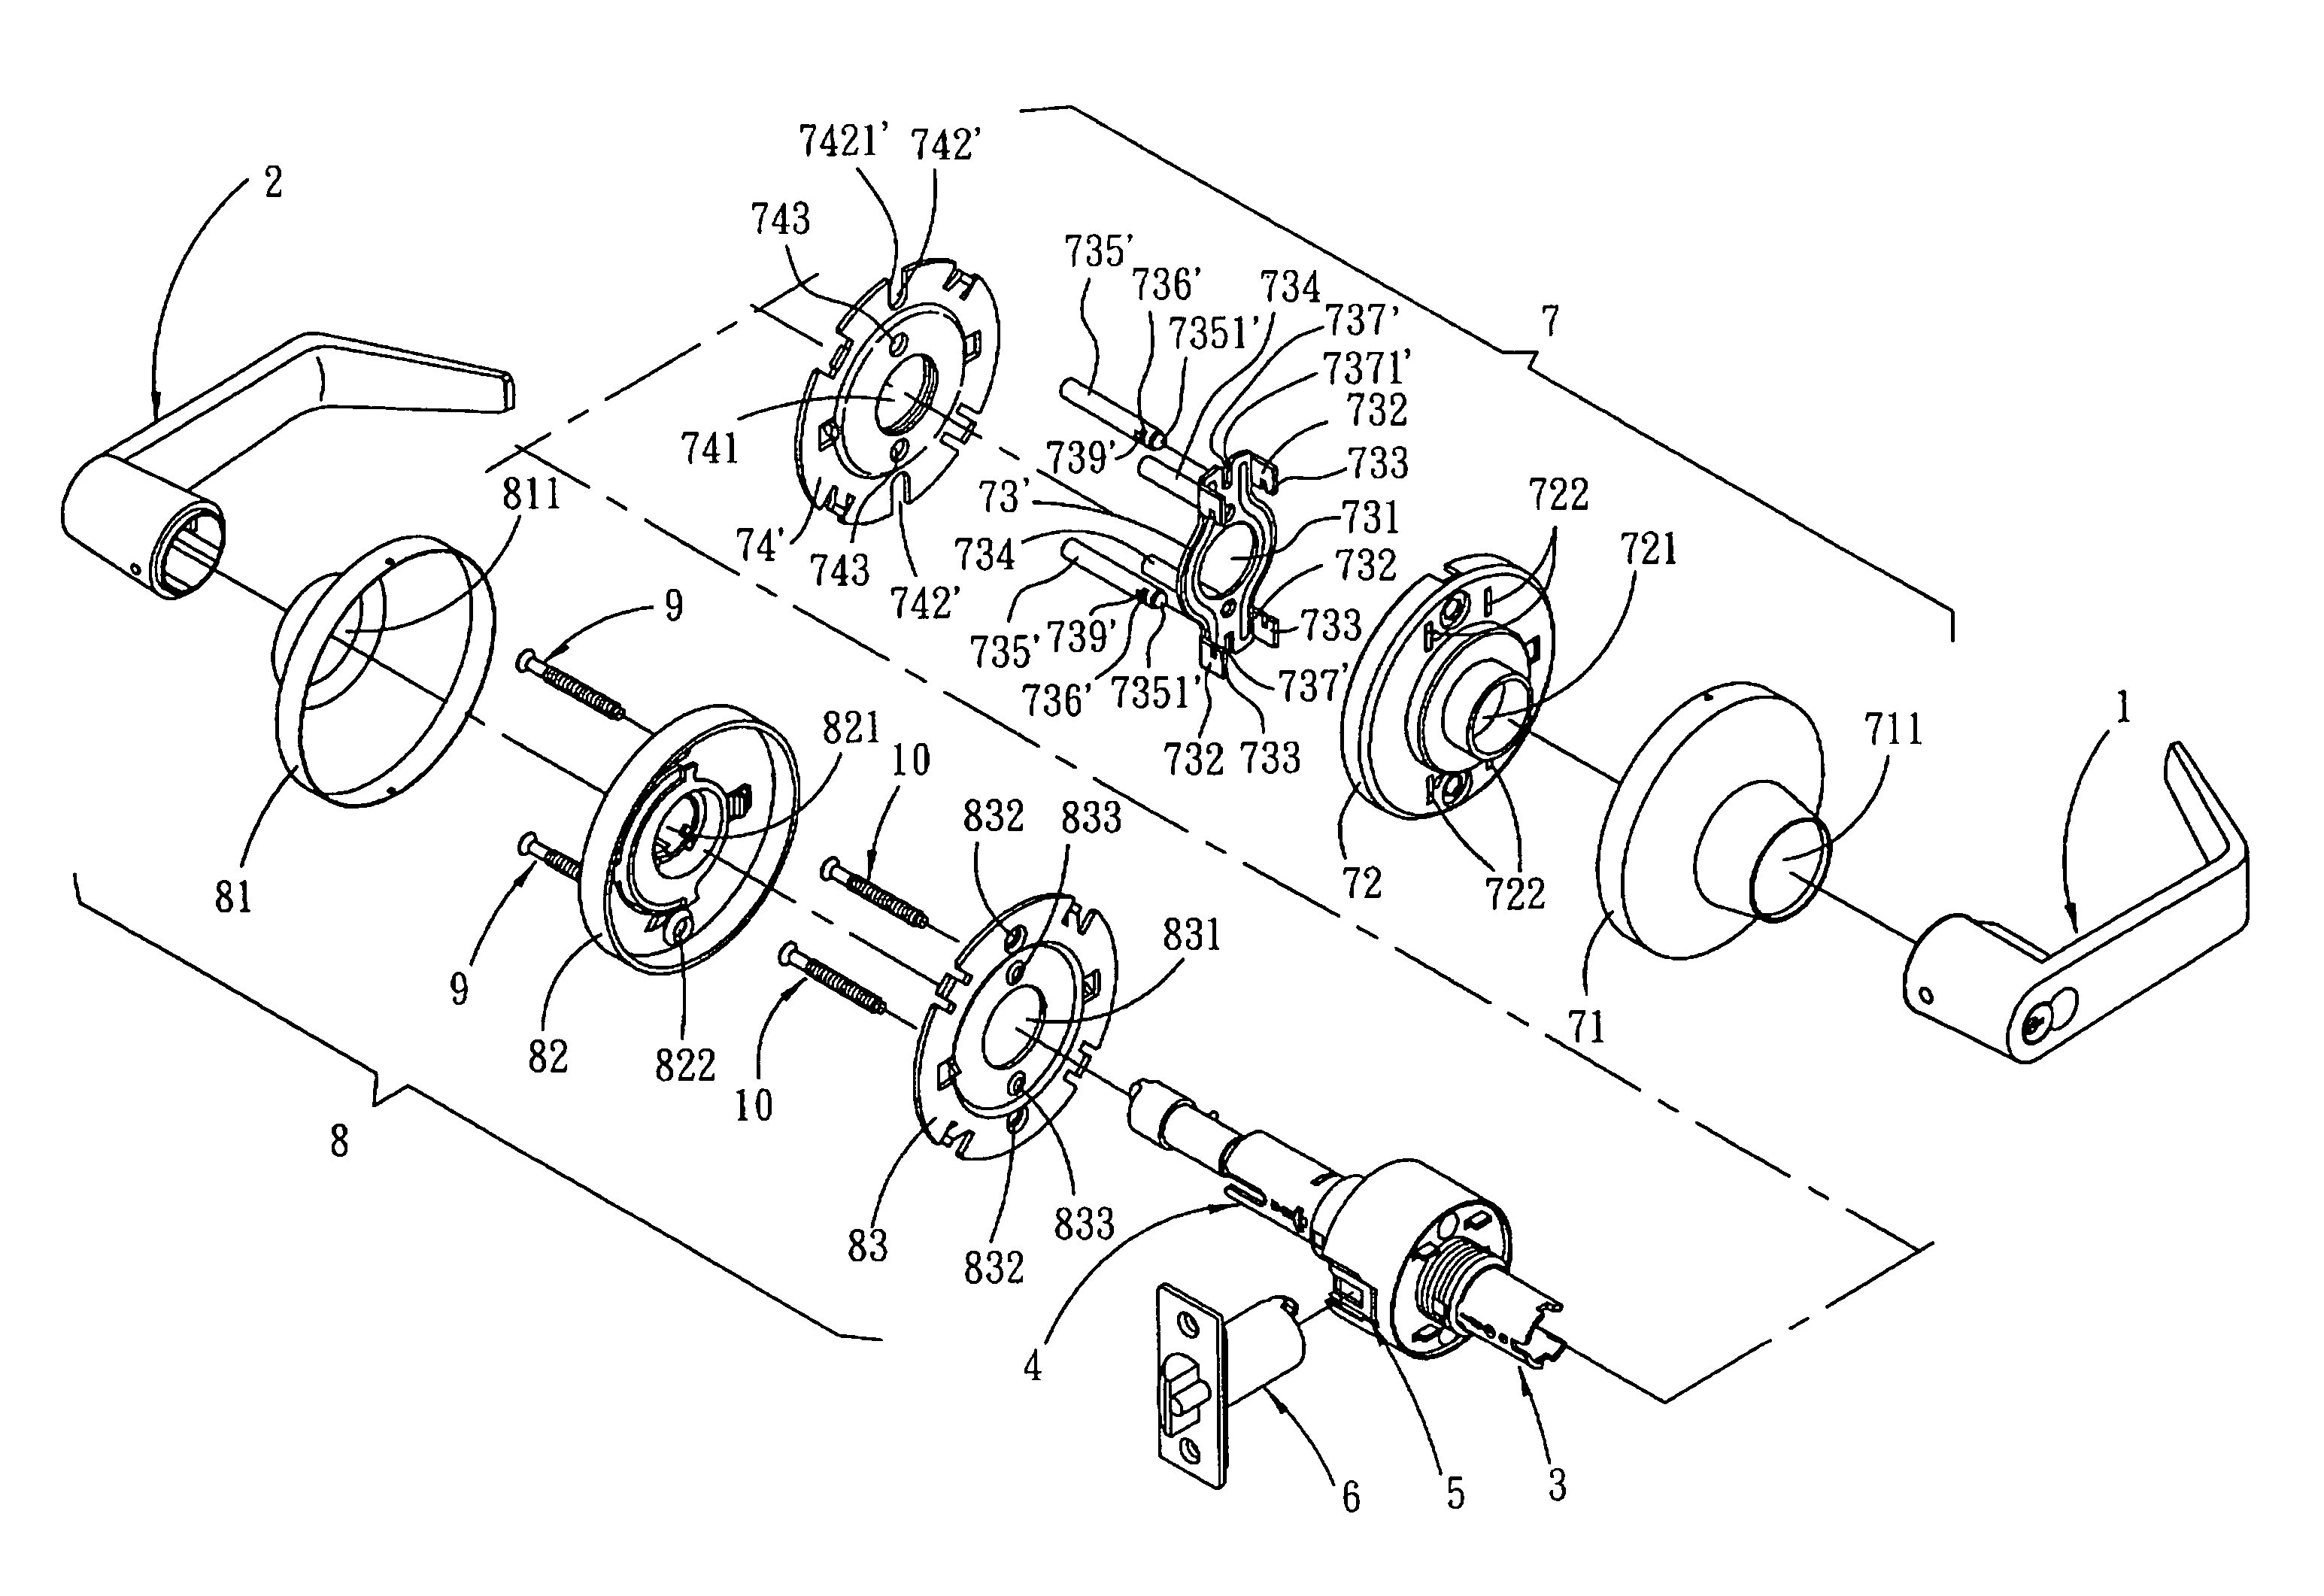 Post-removable construction of a door lock device